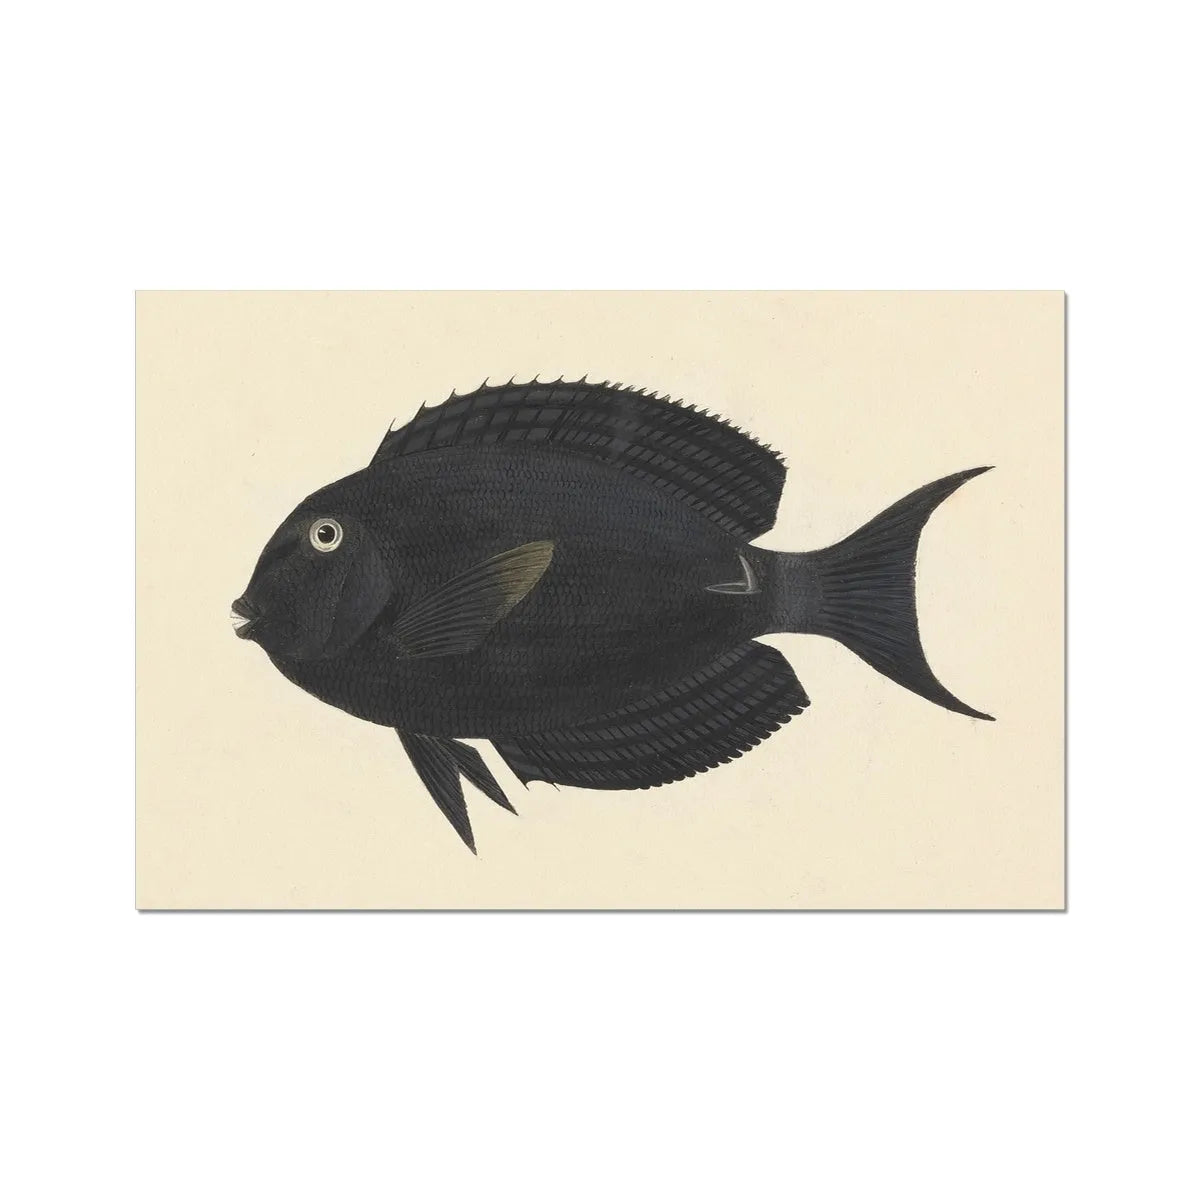 The Other Other Fish By Luigi Balugani Fine Art Print - 24’x16’ - Posters Prints & Visual Artwork - Aesthetic Art